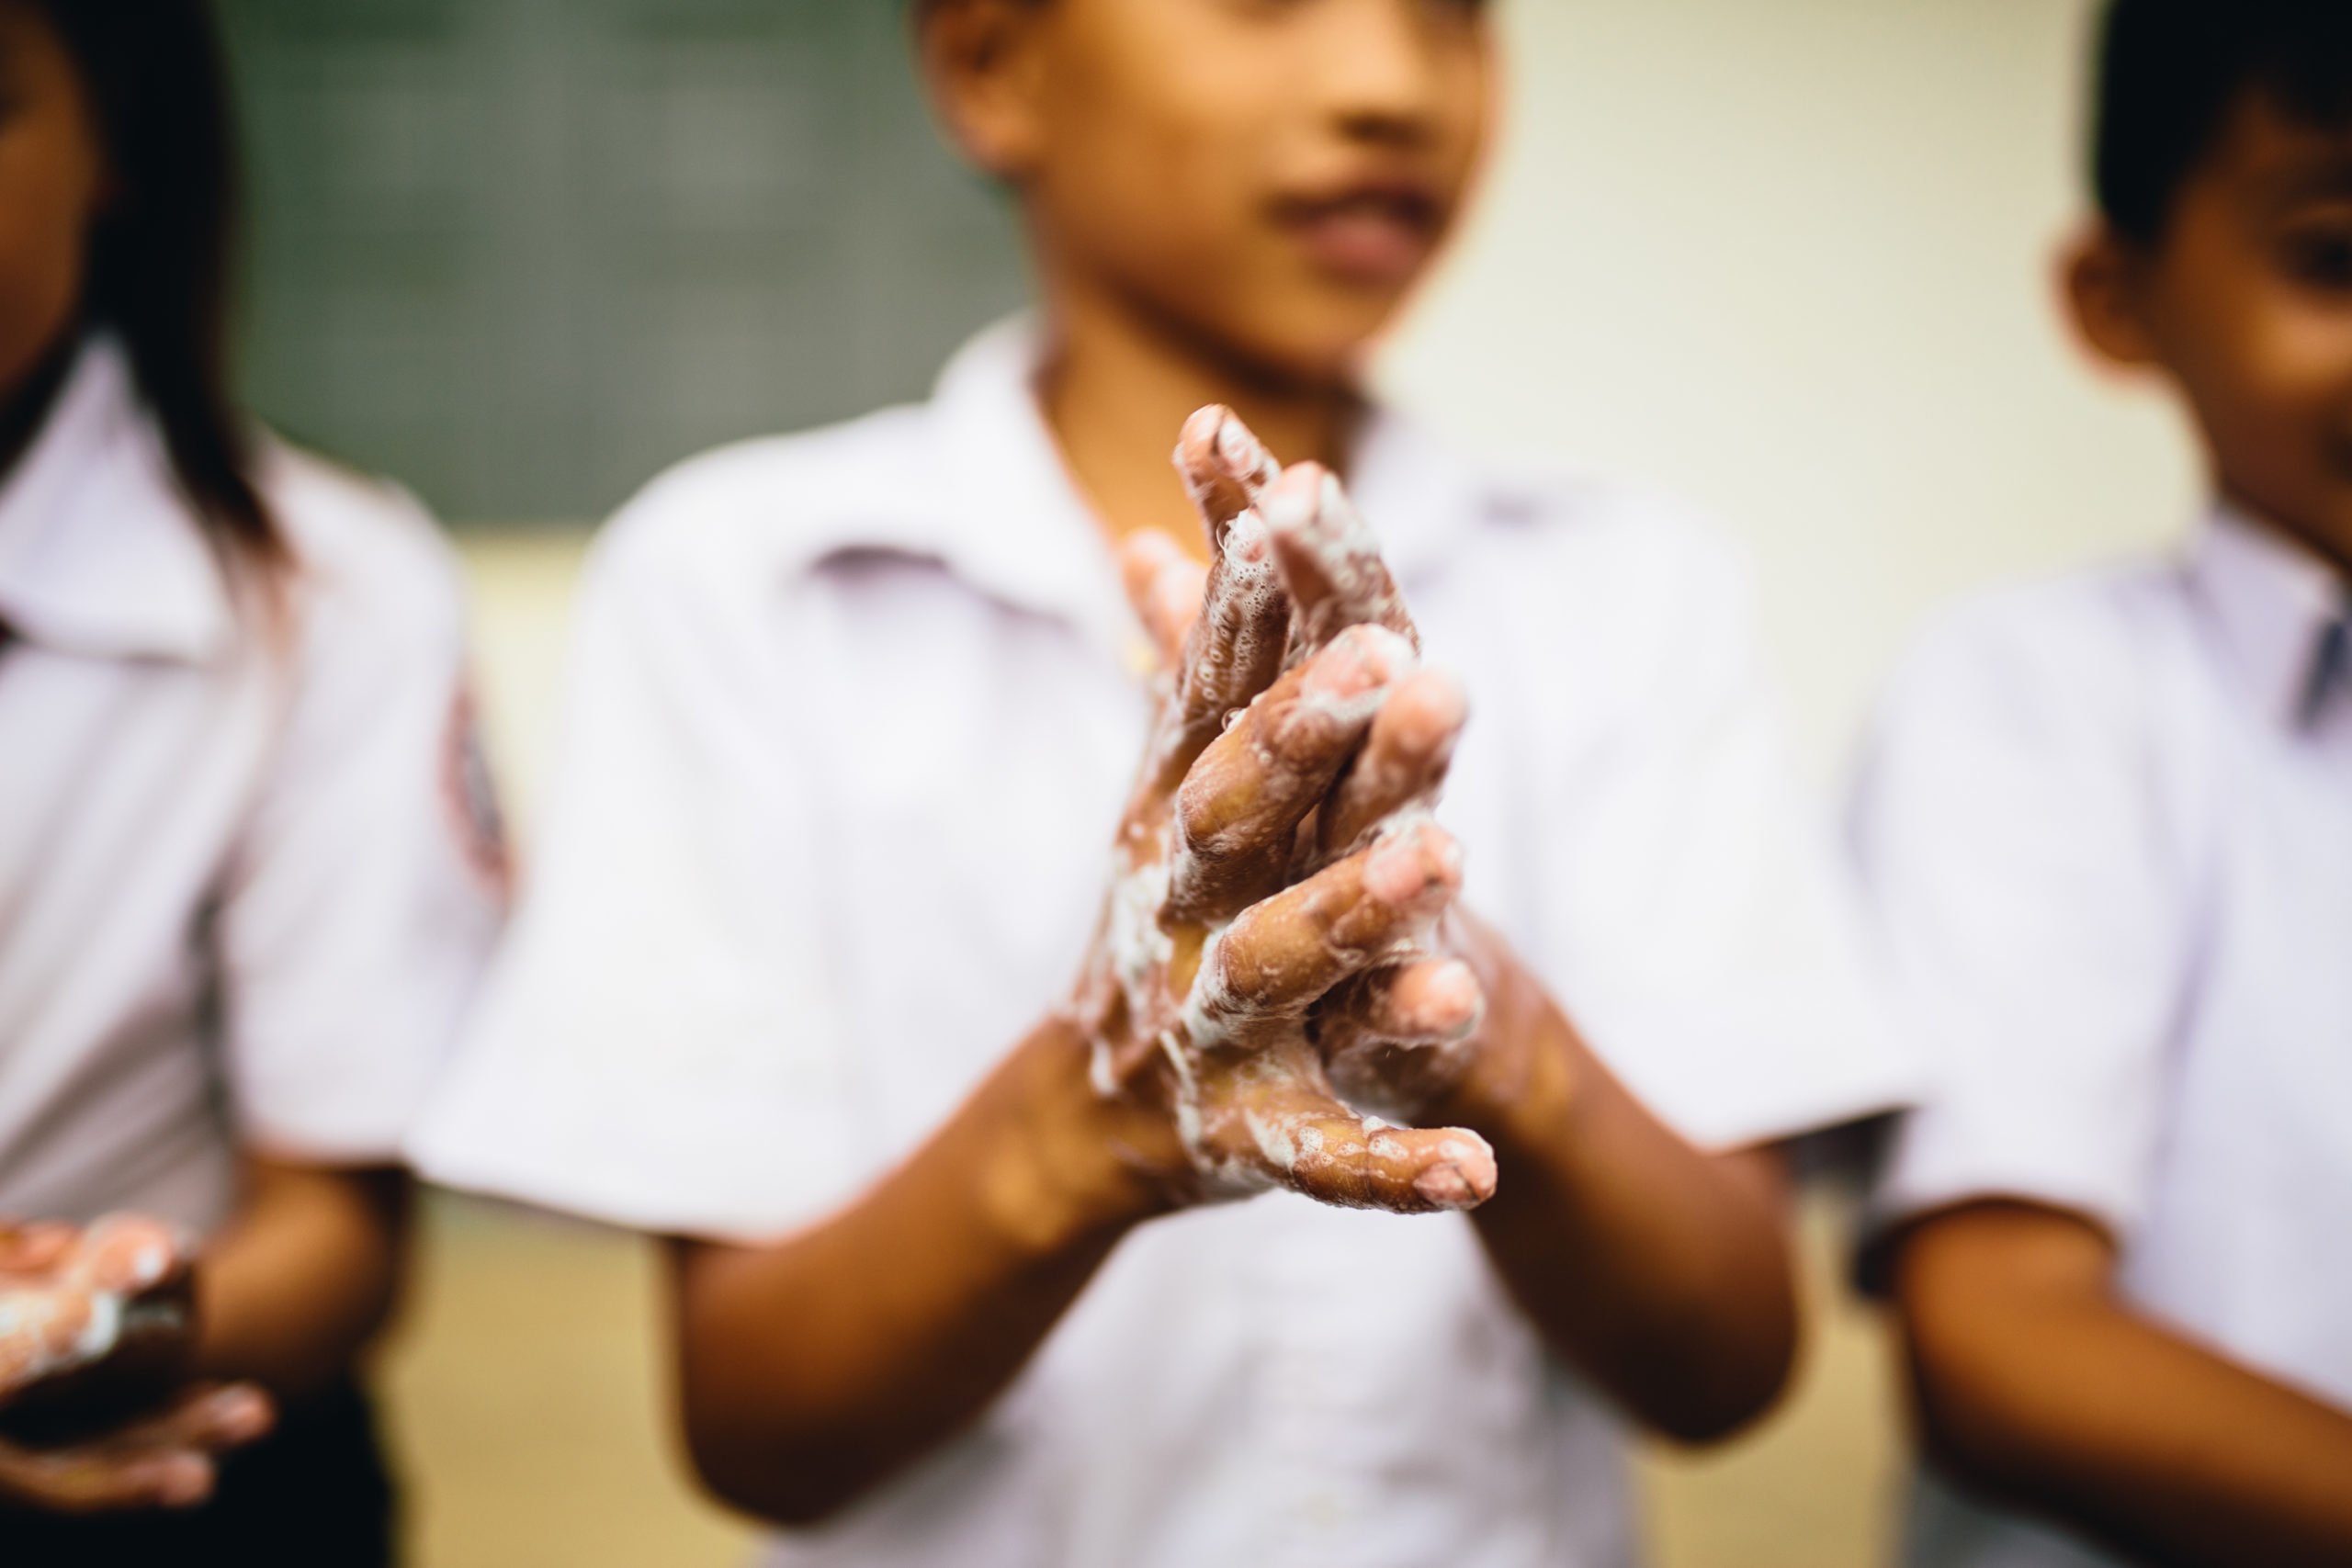 A student in Laos washes their hands with soap at a PoP-provided handwashing station.